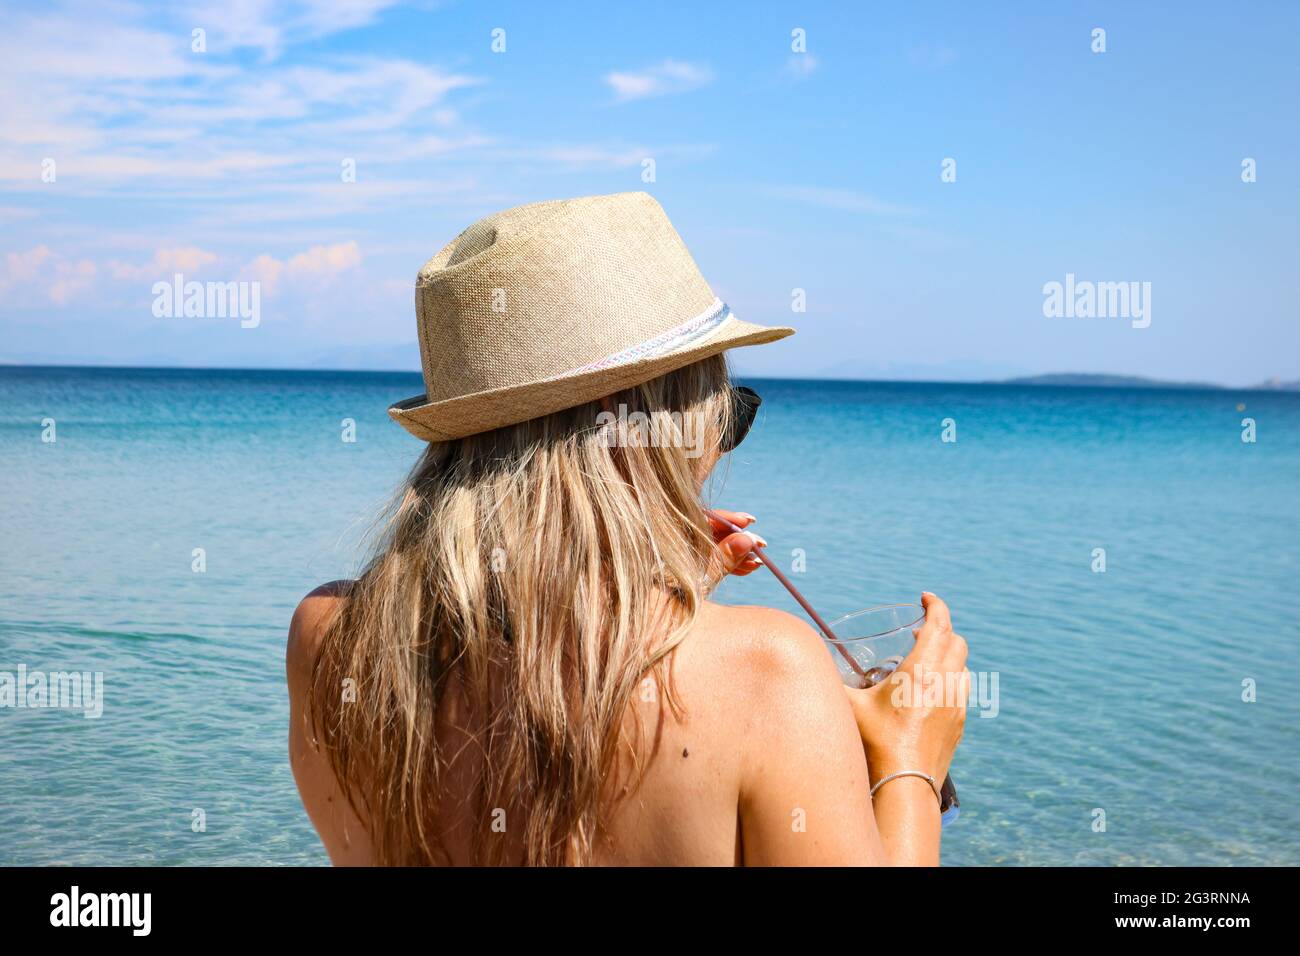 Woman with a hat in front of the sea Stock Photo